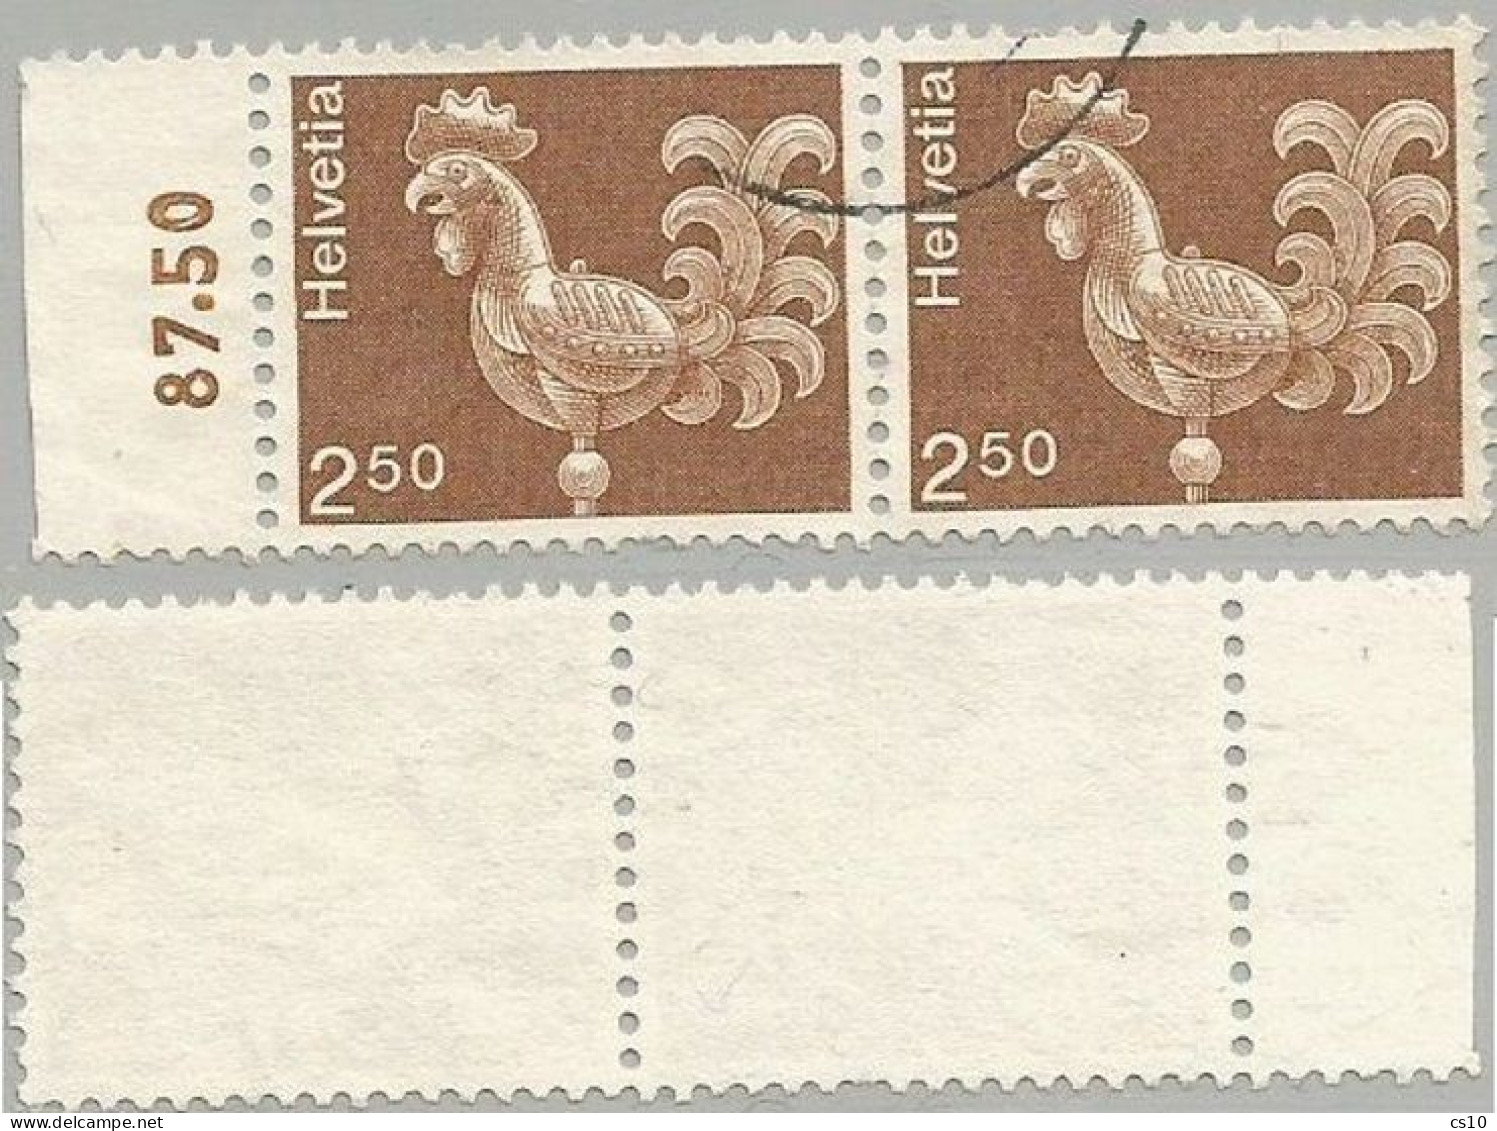 Suisse 1975 Artworks Wheatercock FS.2,50 - Scarce Variety NON FLUO PAPER - #2 Pcs In Horiz. Pair With Sheet Margin - Marcophilie